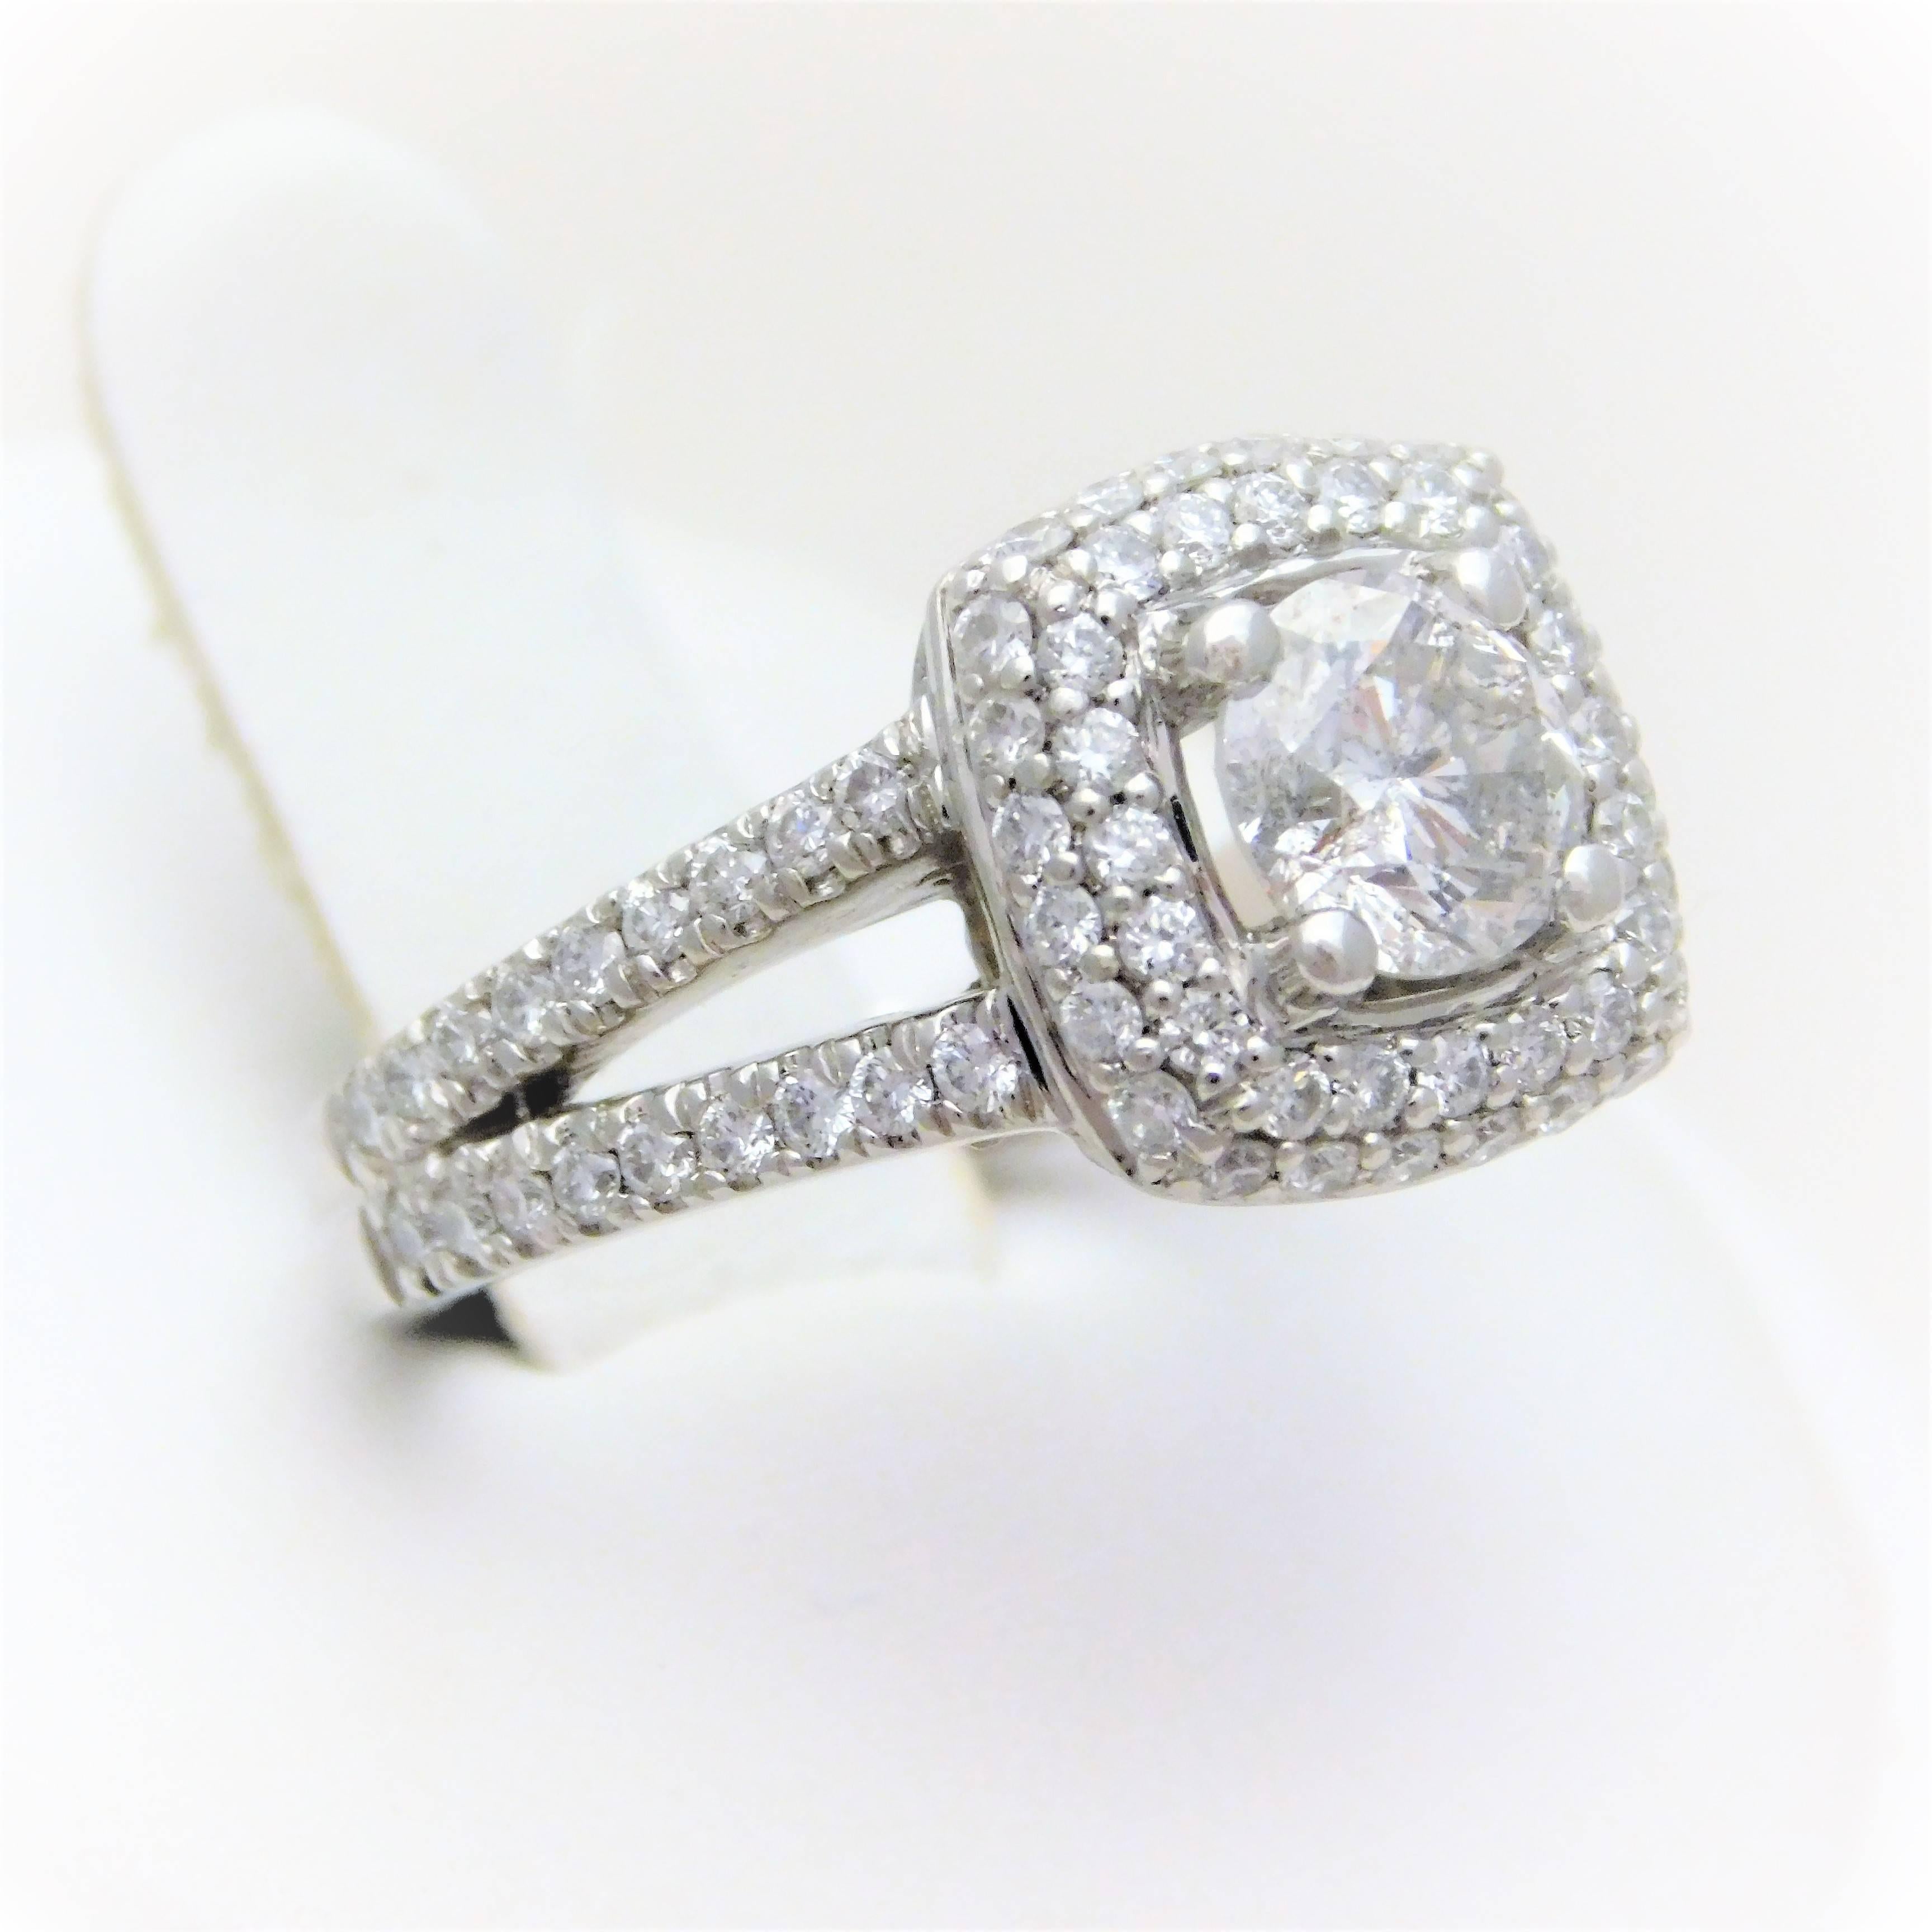 From a Southern Estate.  This absolutely breathtaking custom engagement ring has been crafted in solid platinum.  It has been masterfully jeweled with a 0.98ct/100 round brilliant-cut natural diamond as its magnificent center stone.  This gorgeous